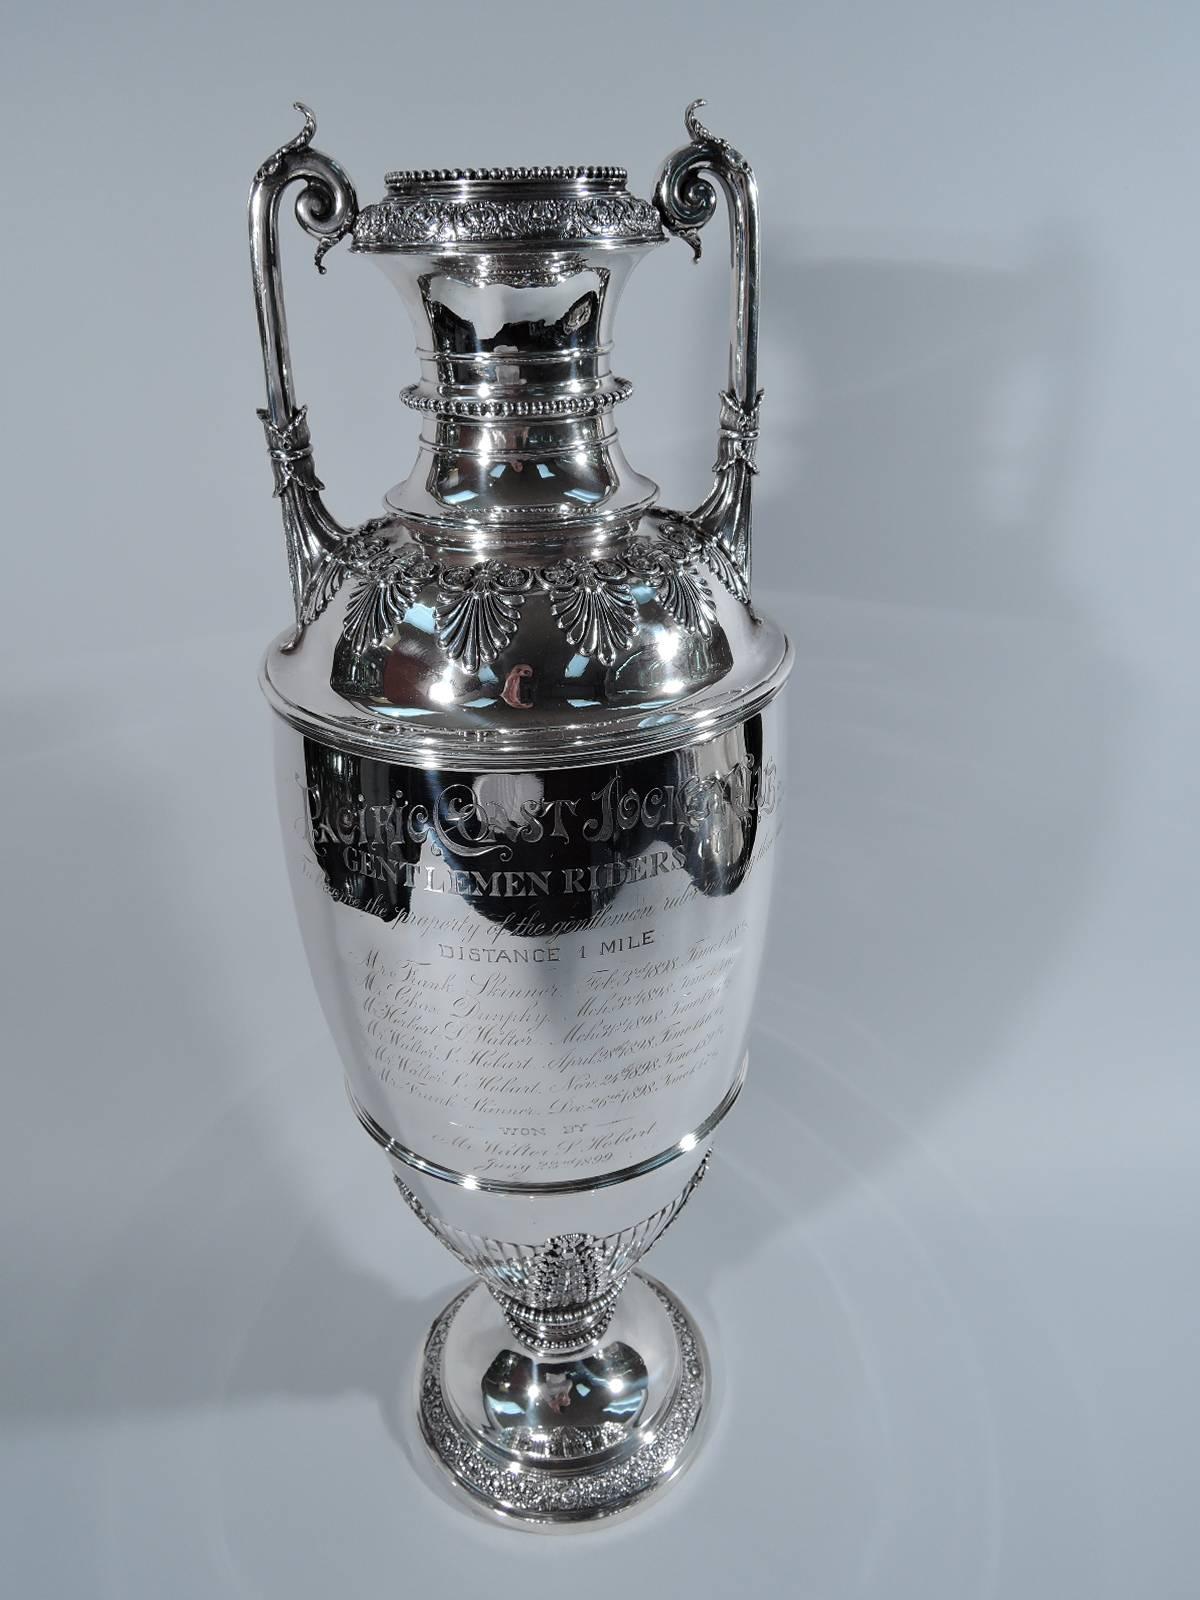 Sterling silver horse racing trophy. Made by Tiffany & Co. in New York, circa 1889. Amphora with tall body on raised foot. Two-leaf capped straight handles with leaf mounted to shoulder and volute scroll terminal mounted to neck. Ornament includes